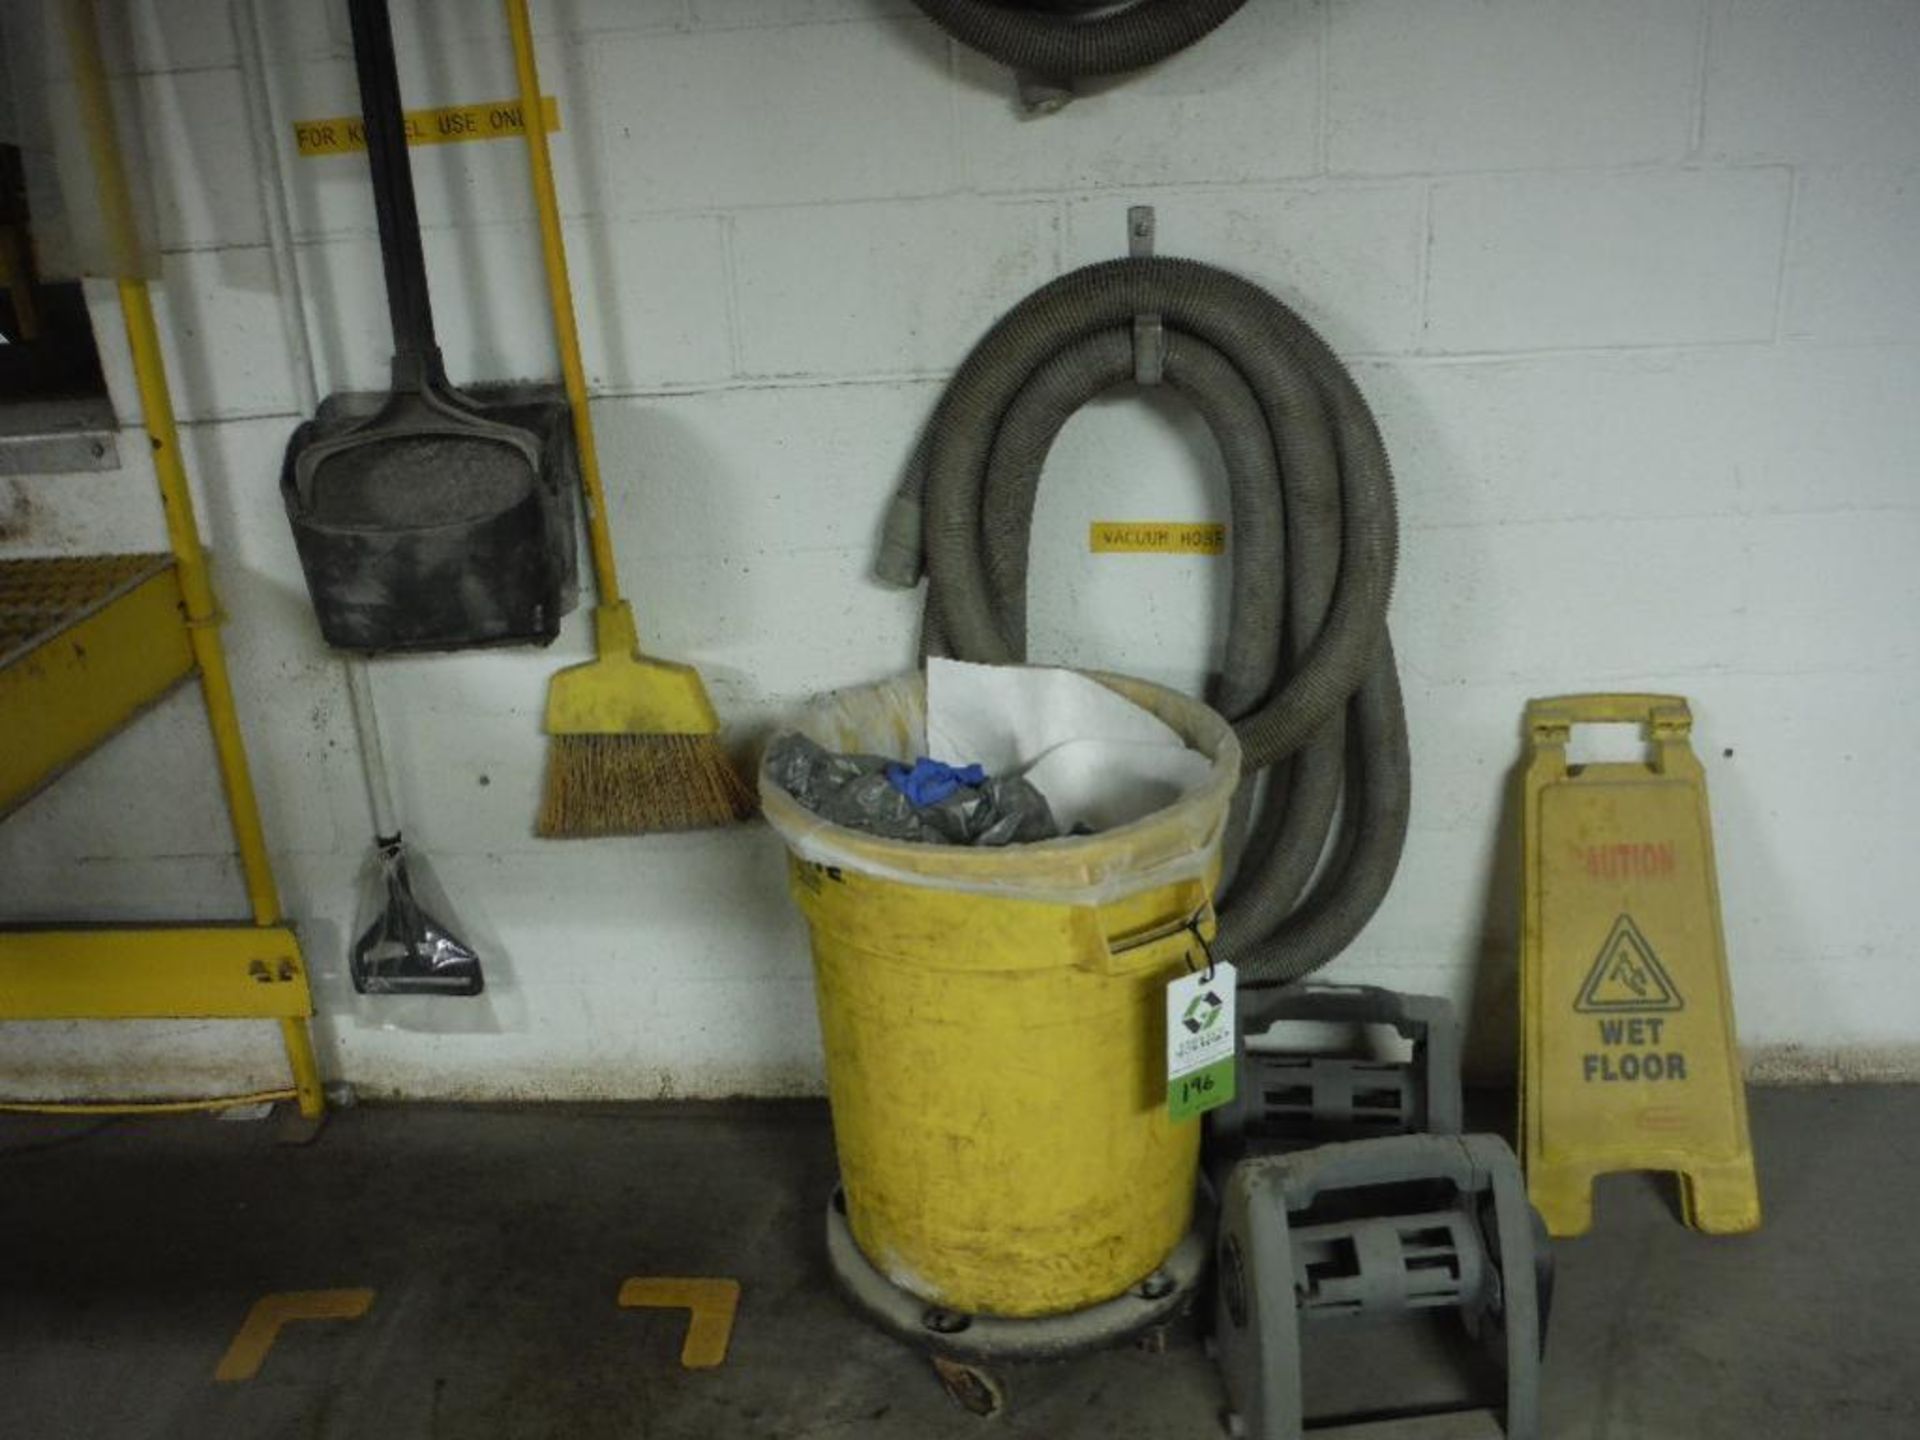 Vacuum hose, garbage can, and sanitation supplies. Rigging Fee: $25